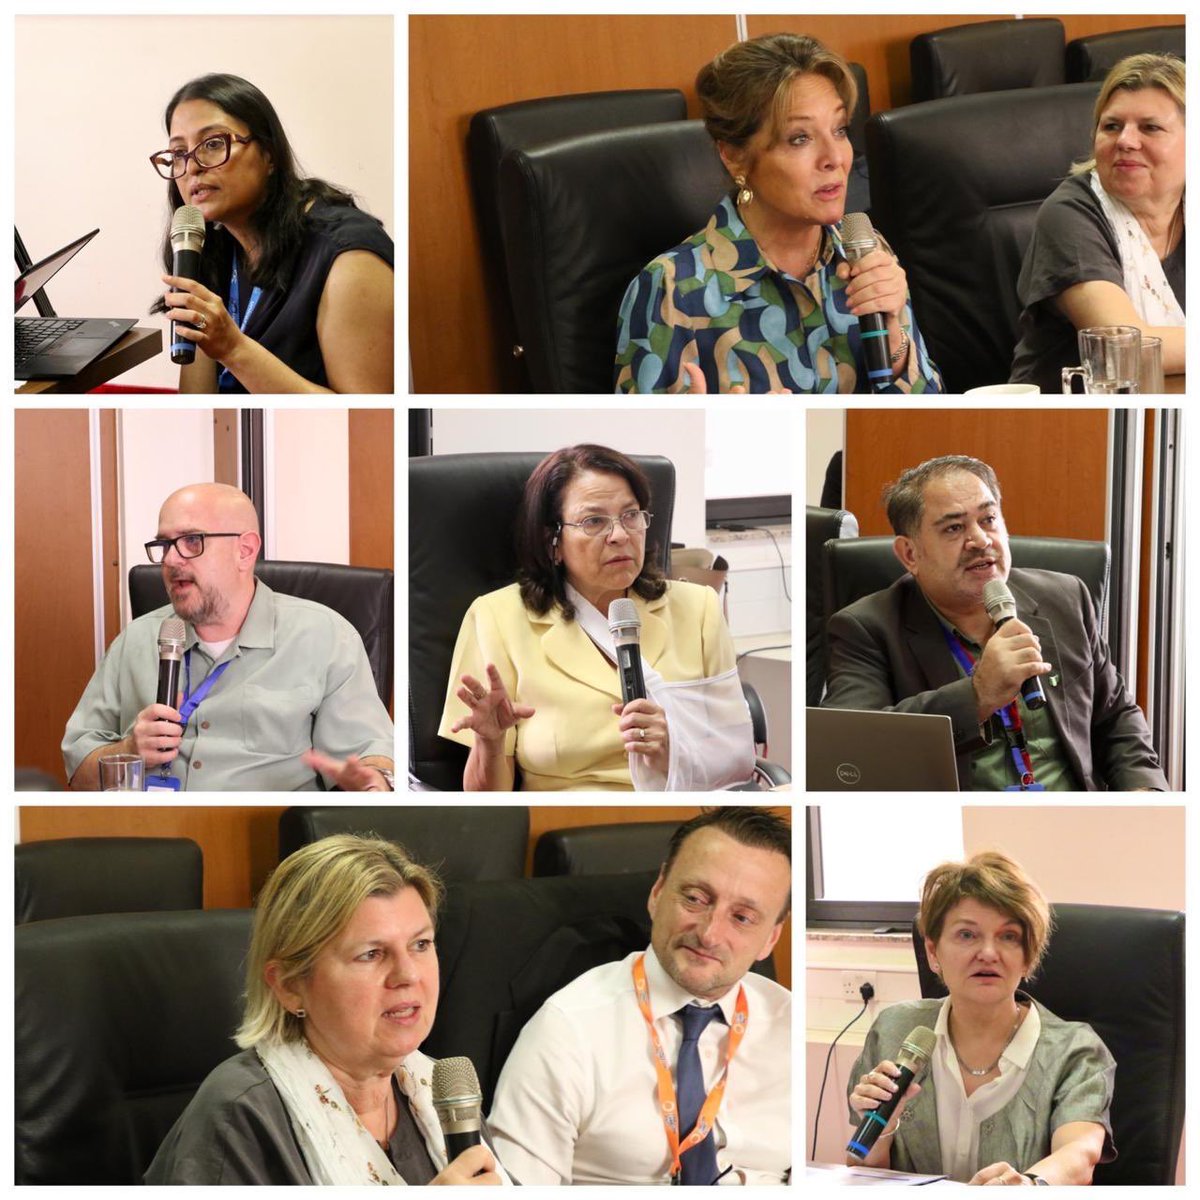 #ECW's joint mission to #Nigeria ECW delegation, led by @YasmineSherif1, incl ECW ExCom Co-Chairs, meet w/#MYRP grantees @UNICEF_Nigeria @SaveChildrenNG & @NRC_CWA to witness ECW's impact to support crisis-affected children to access #QualityEducation #MHPSS+safe learning in🇳🇬.